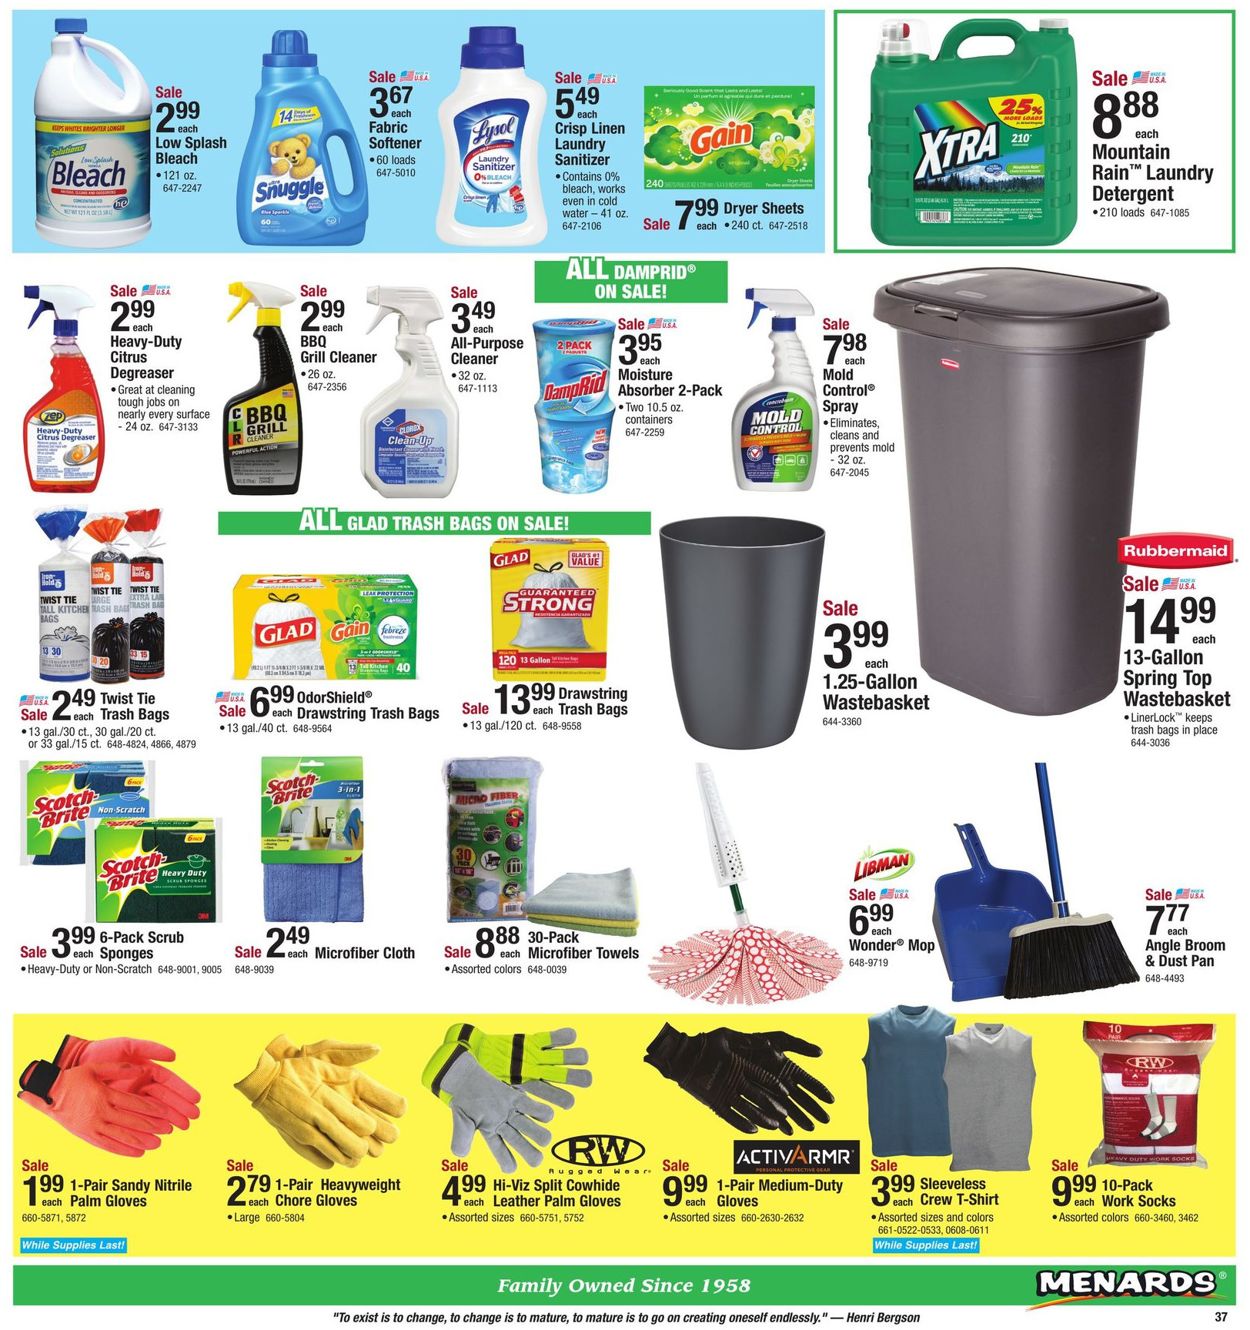 Menards Current weekly ad 04/21 - 05/05/2019 [41] - frequent-ads.com